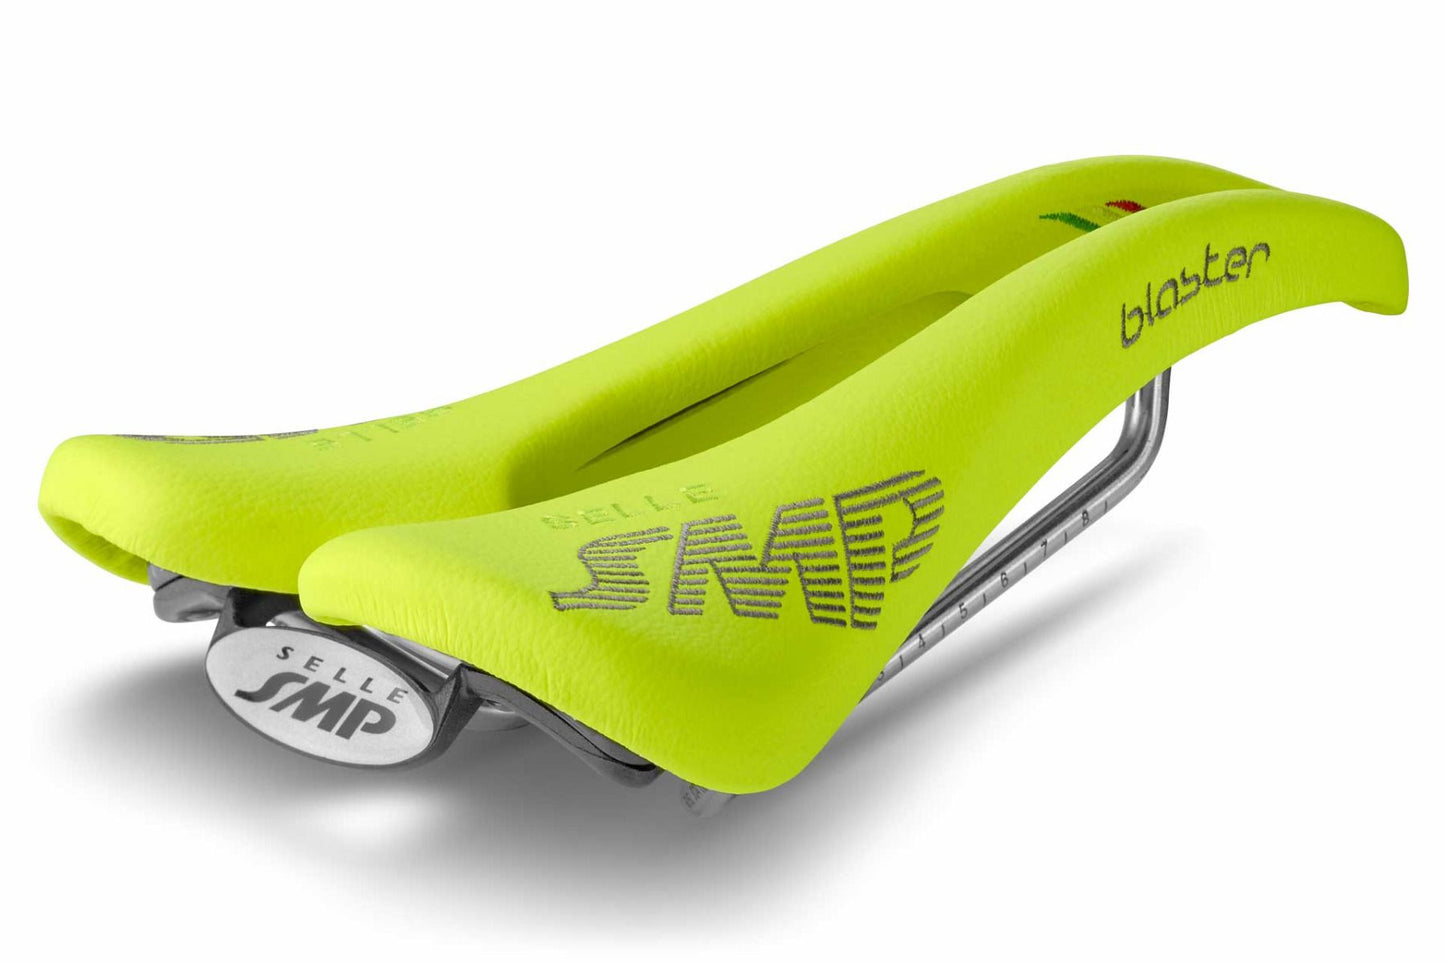 Selle SMP Blaster Saddle with Steel Rails (Fluro Yellow)